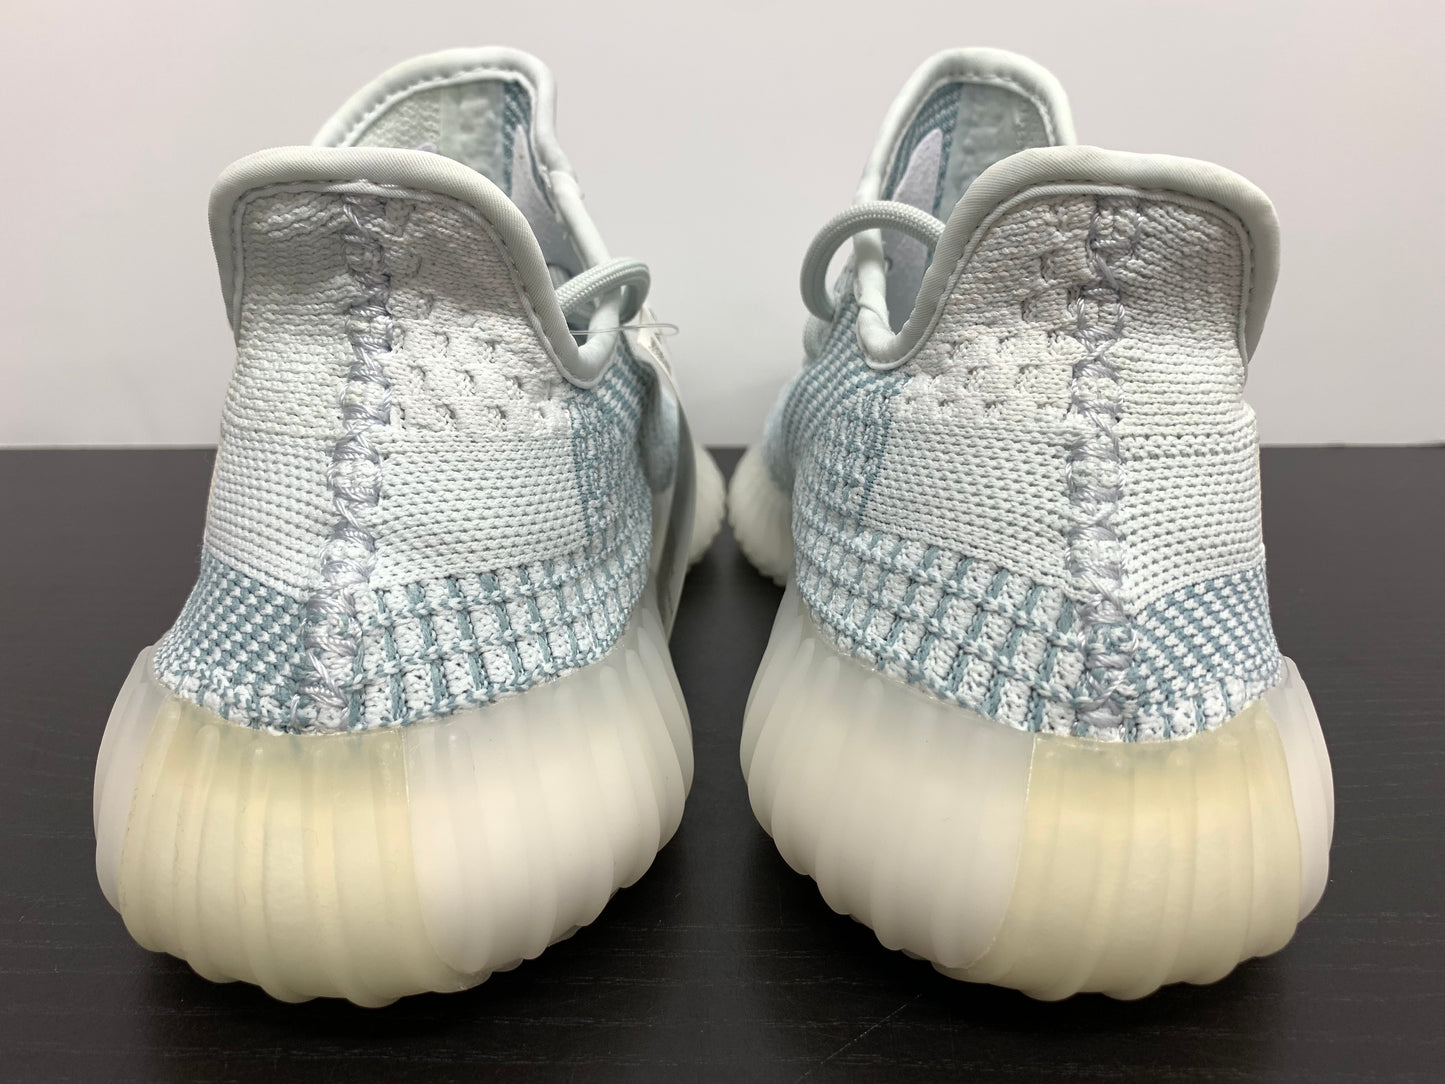 Adidas Yeezy Boost 350 V2 Cloud White Non Reflective